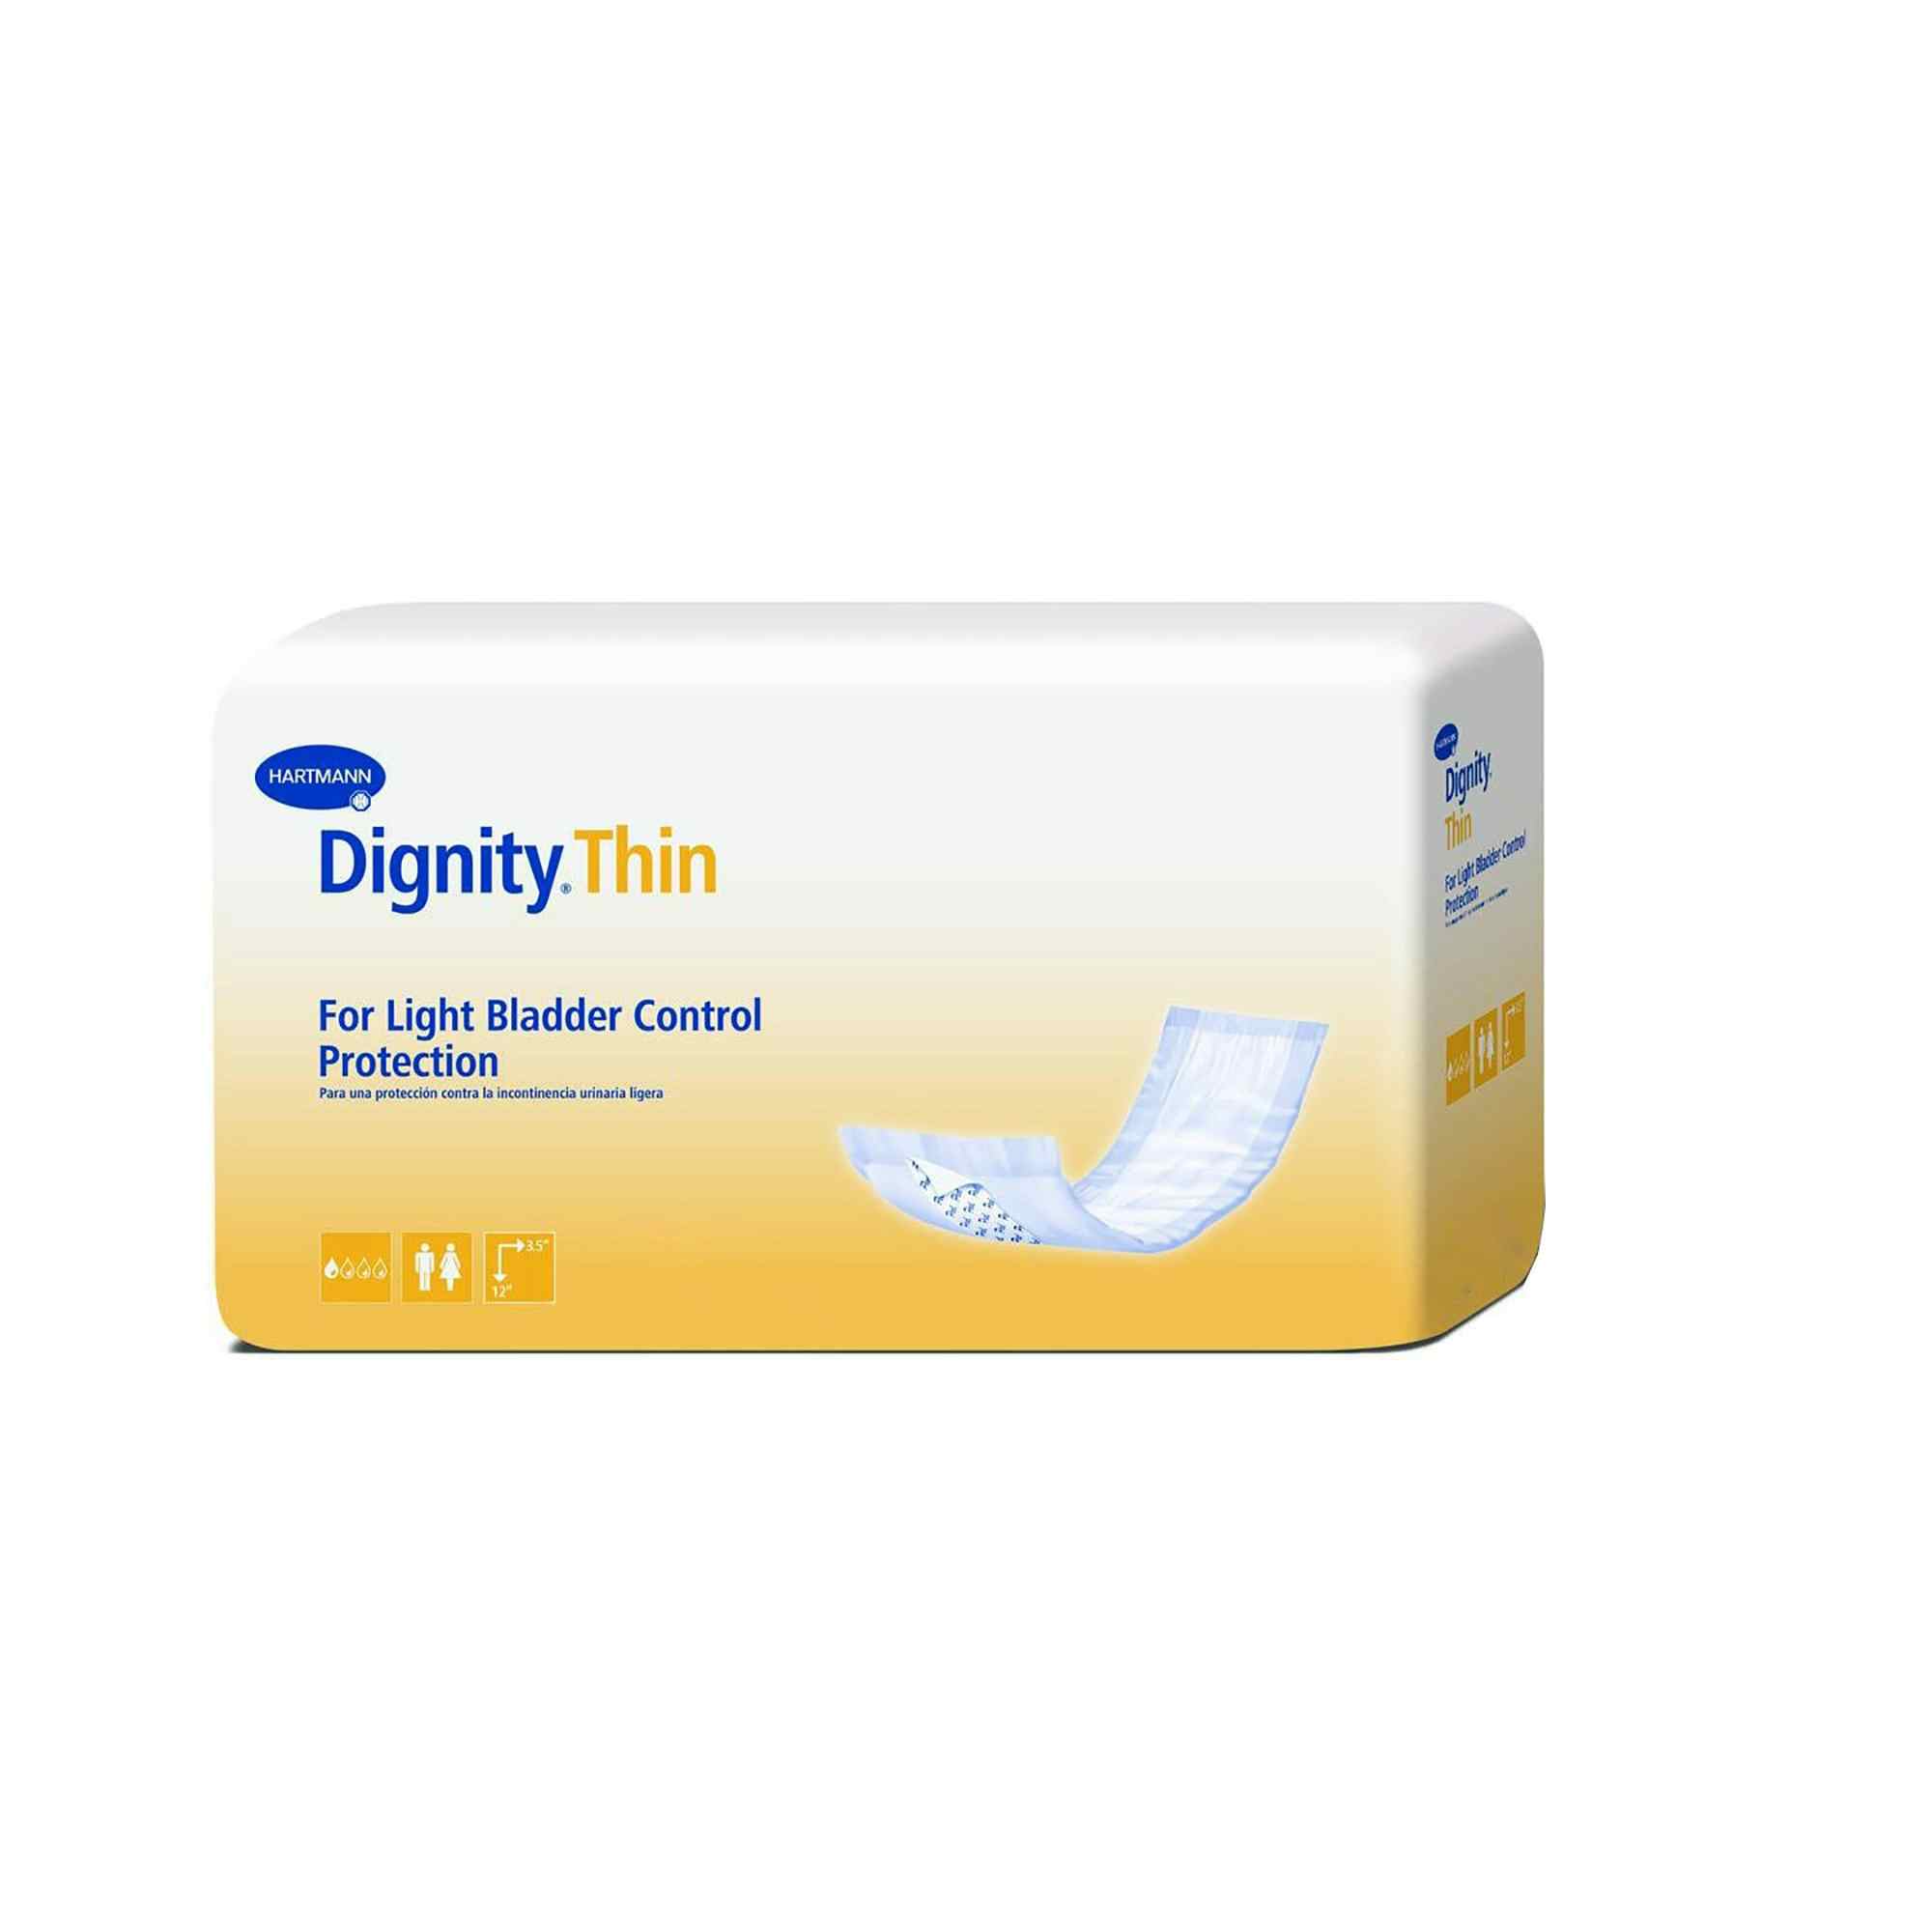 Dignity Thin Adult Unisex Disposable Bladder Control Pad, Light Absorbency, 30054-180, White - One Size Fits Most - Pack of 45